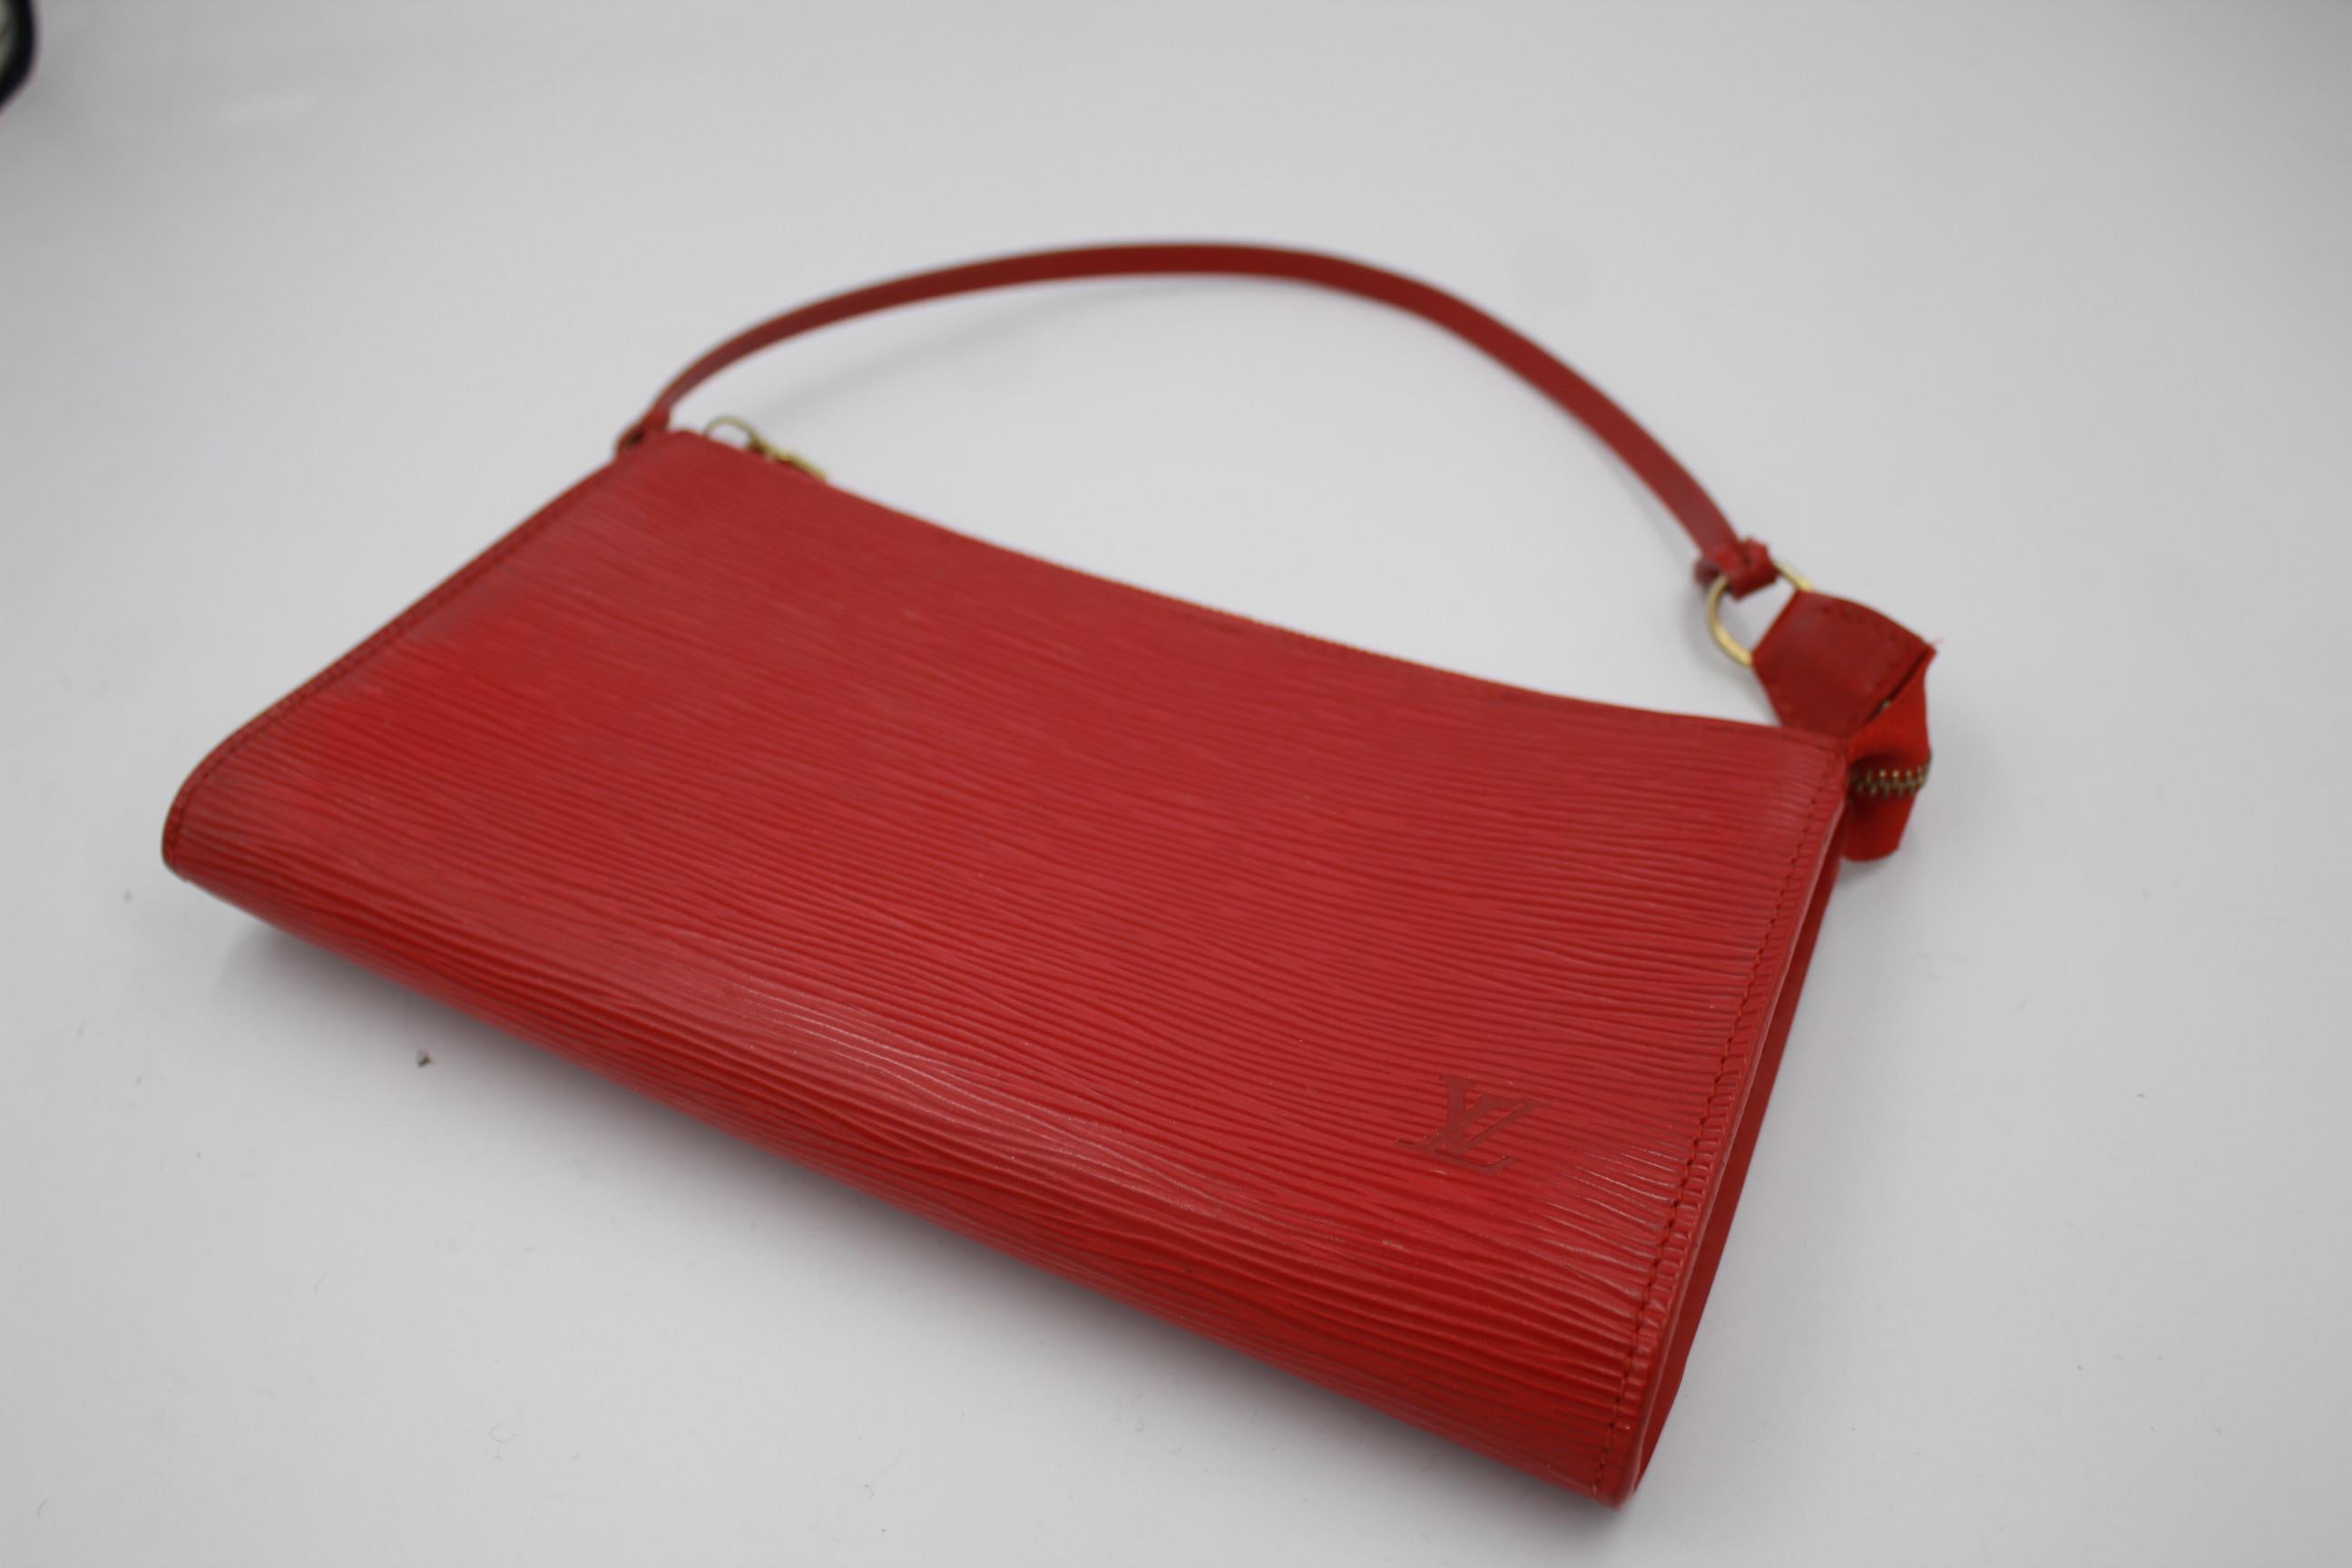 Red Louis Vuitton Accessoire Clutch in red épi leather